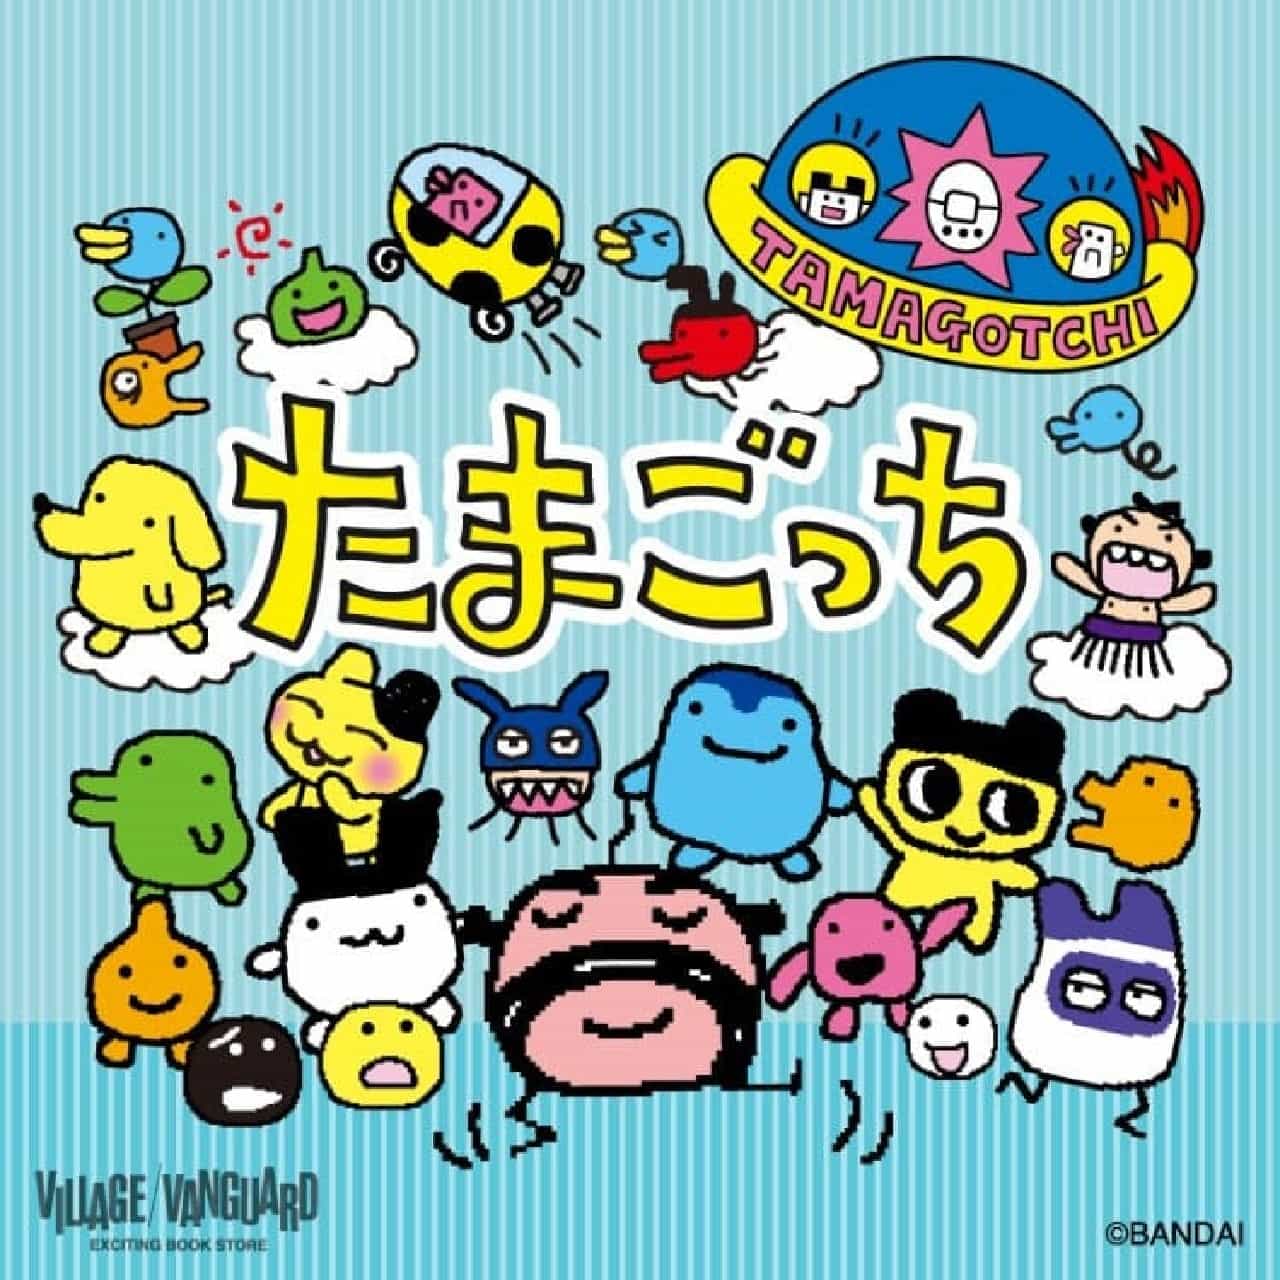 Retro-like Tamagotchi items go on sale at Village Vanguard on May 24, 2024! Nostalgic denim salopettes and ringer T-shirts are also available Image 1